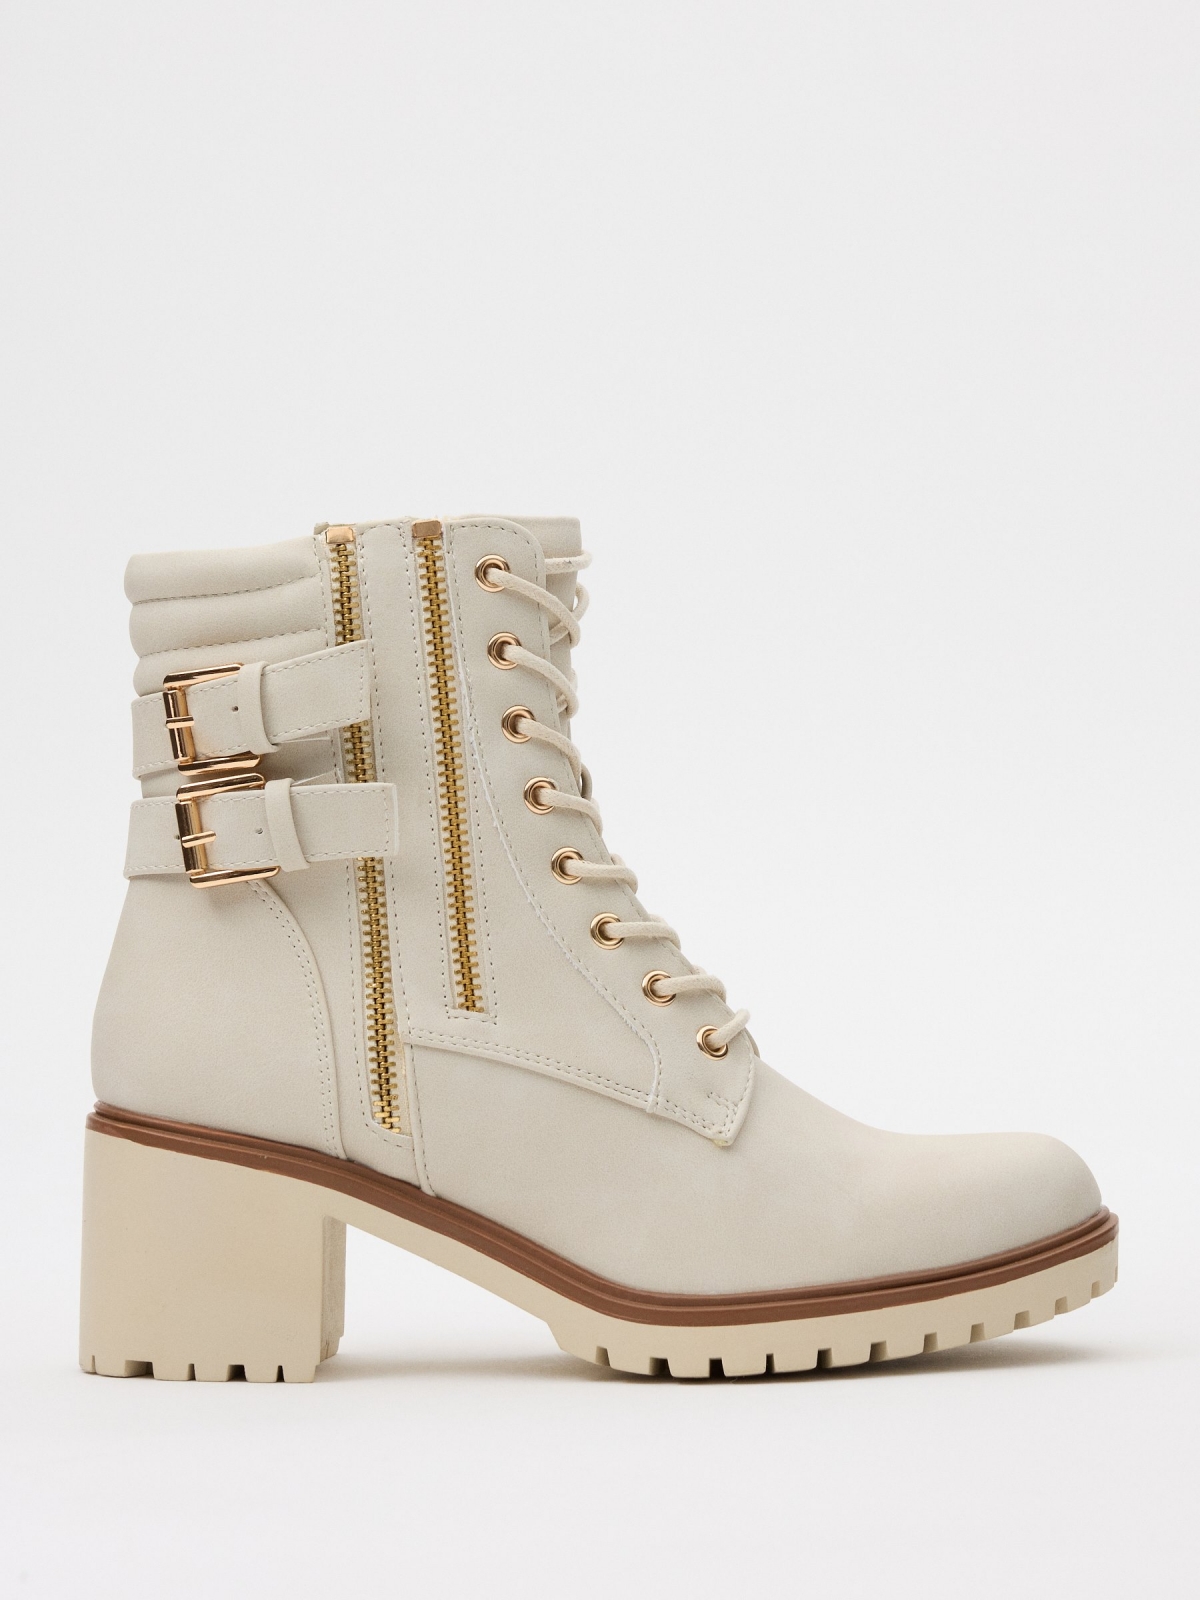 Ankle boots with double buckle heel